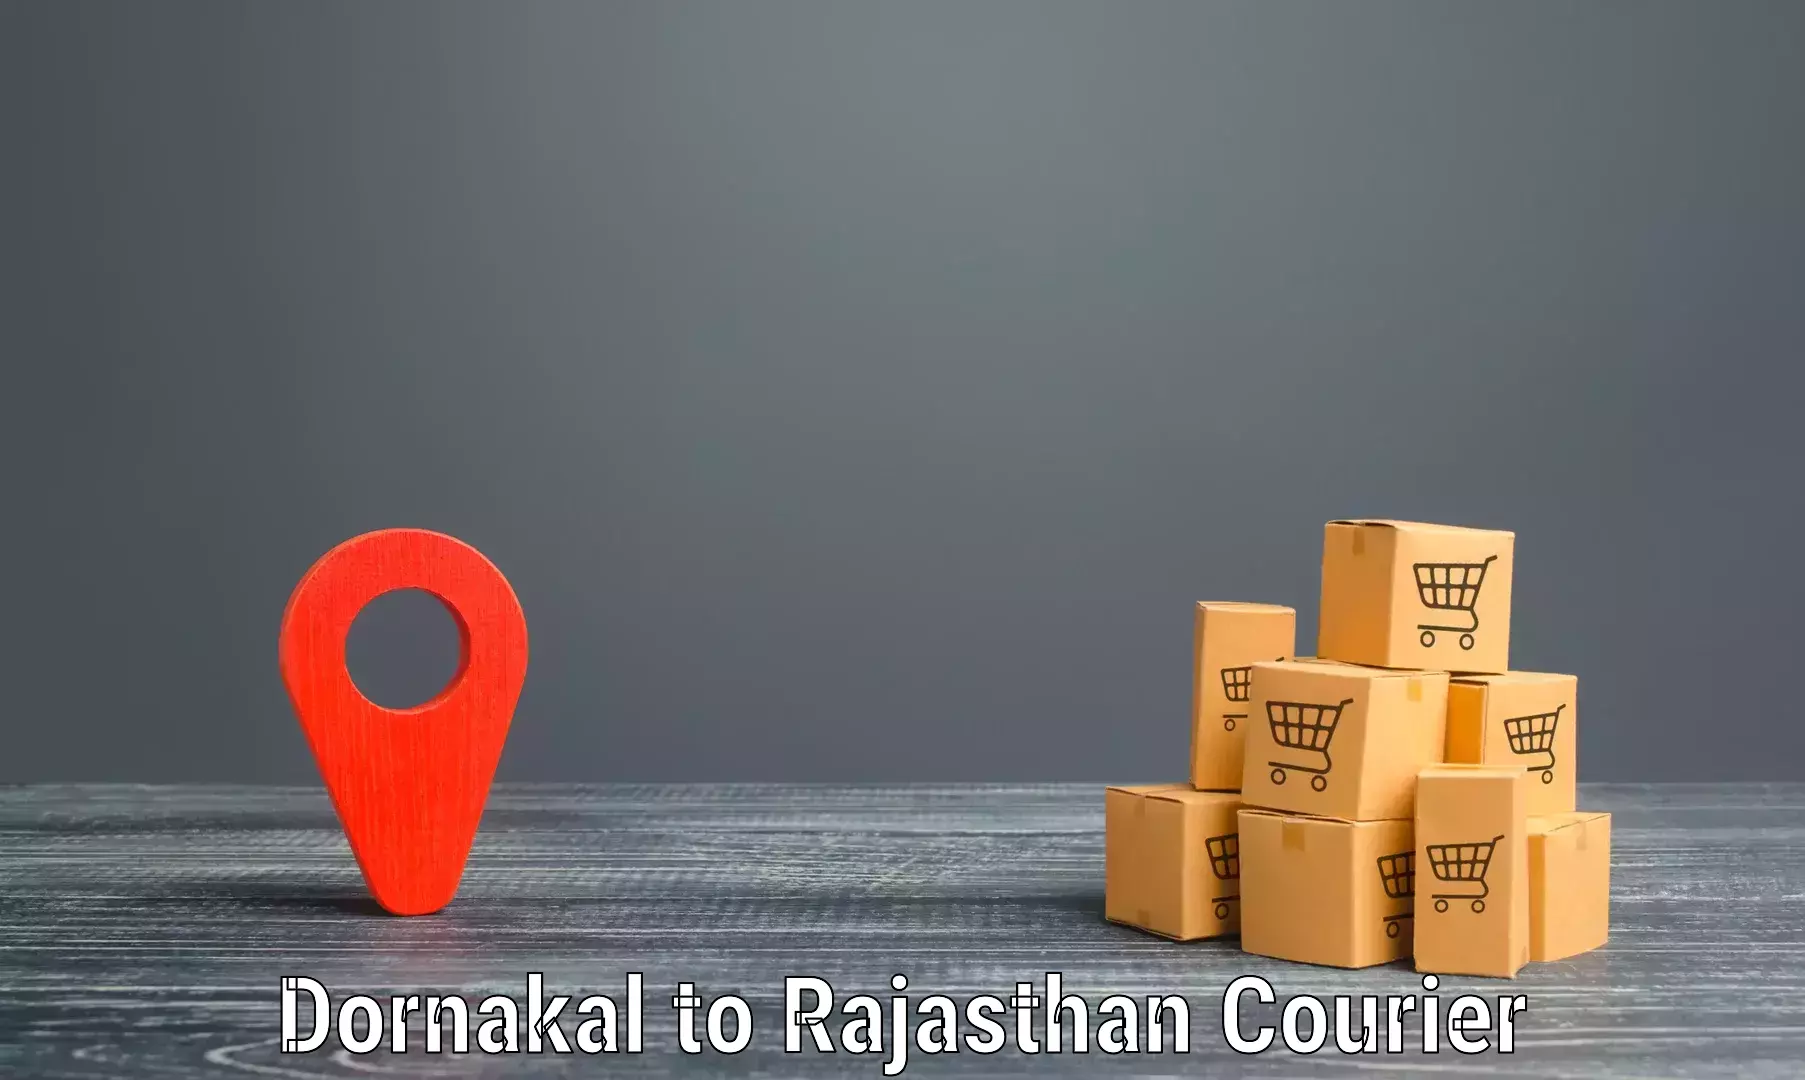 Next-day freight services Dornakal to Mathania